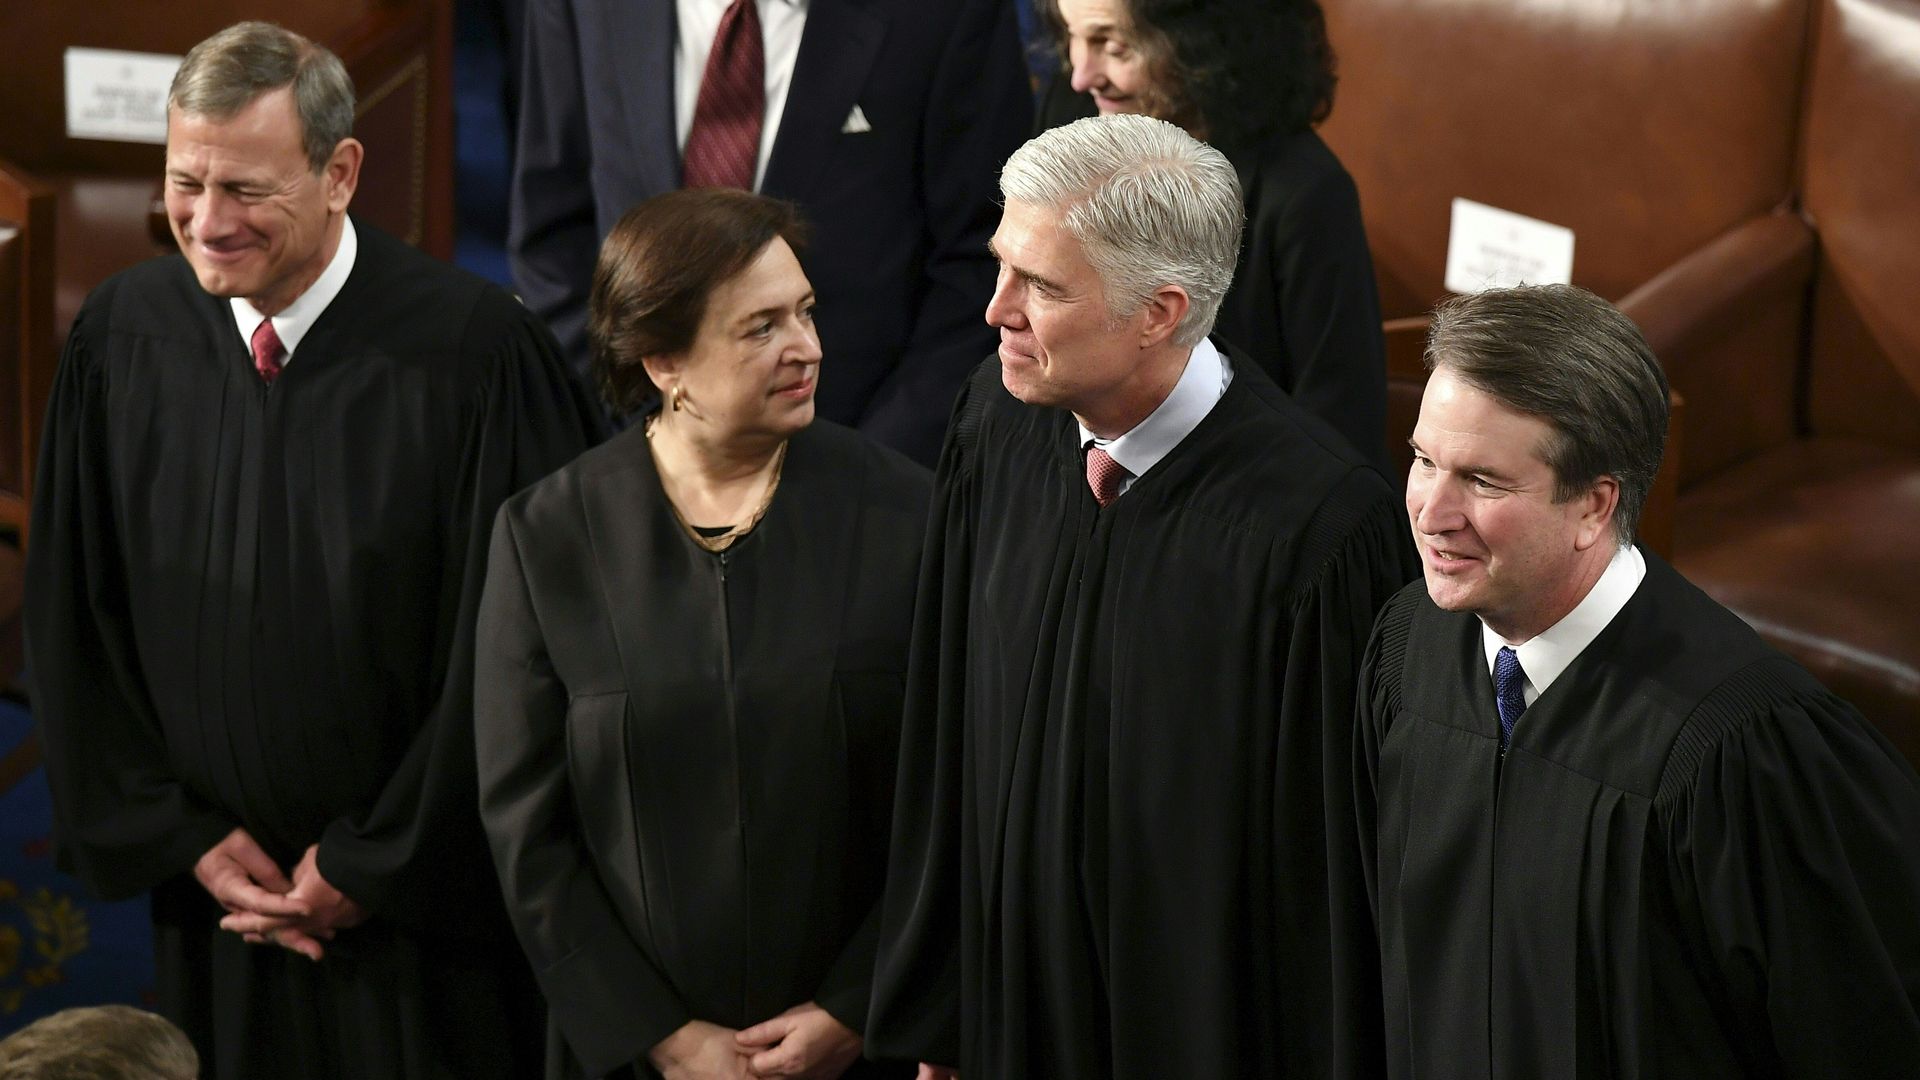 In this image, the Supreme Court justices stand in a line 